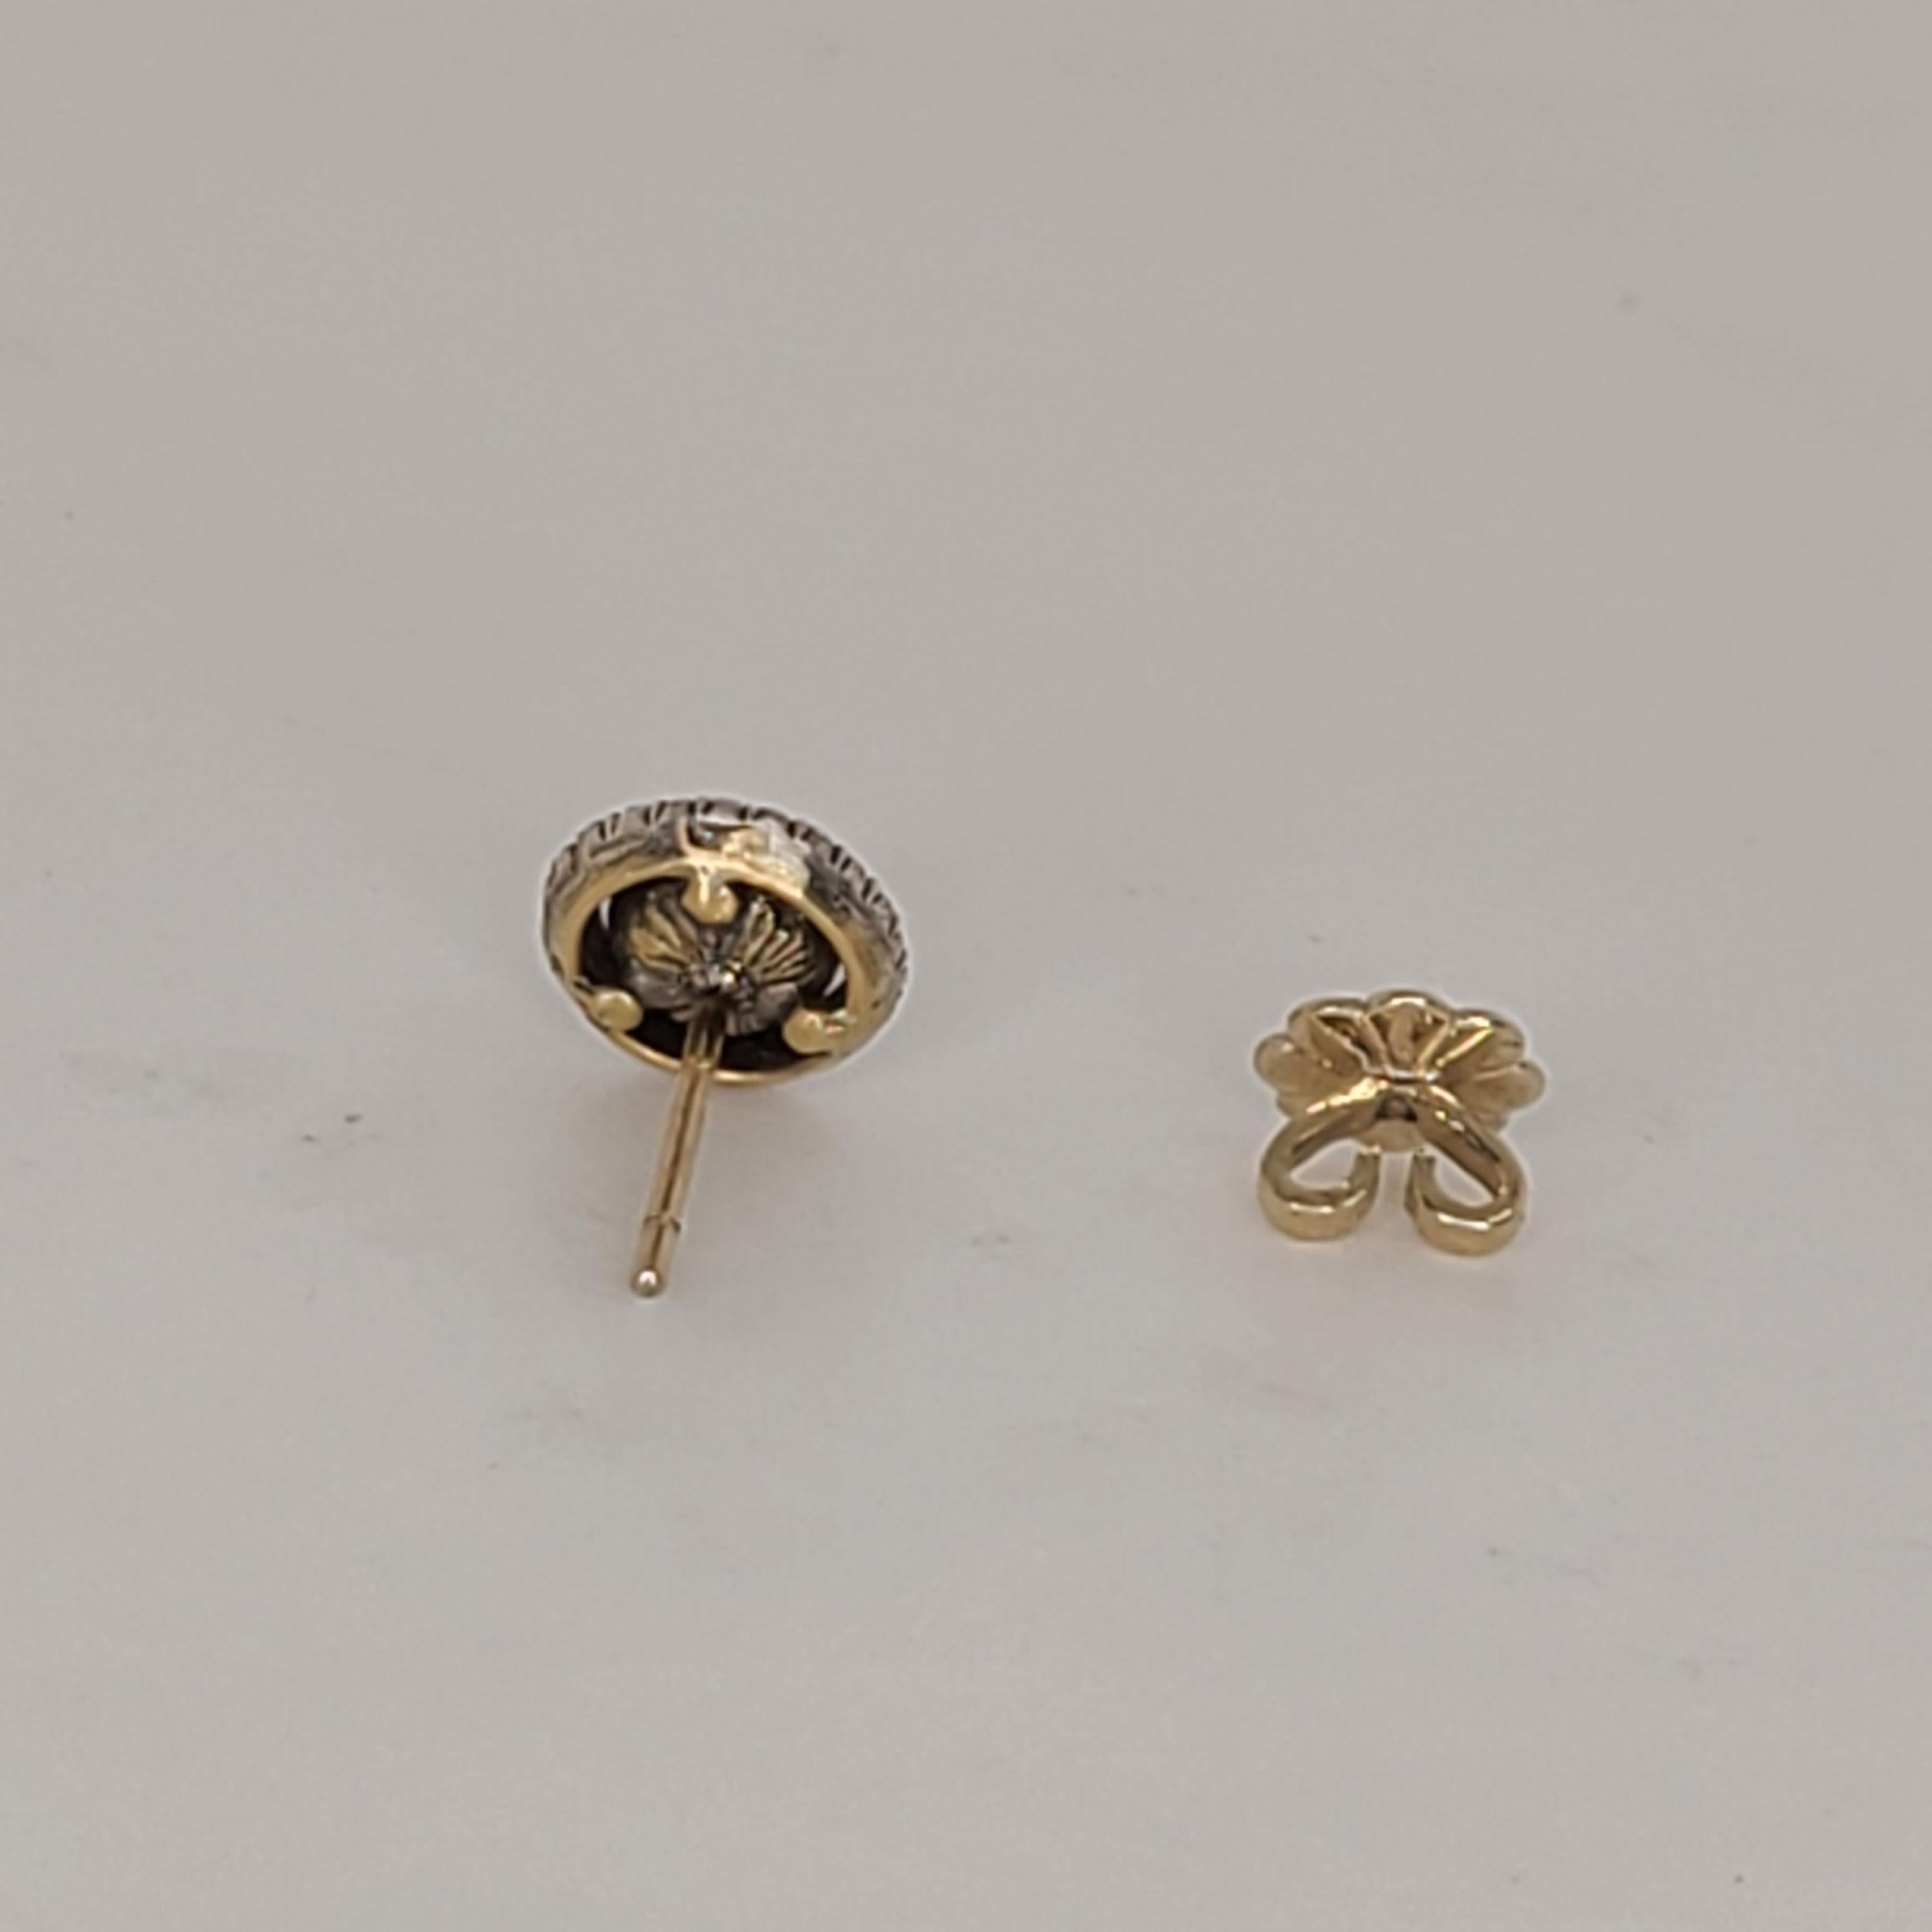 This 18K Gold stud earrings have 0.65cts of rose-cut Diamonds and are surrounded by 0.32cts of round brilliant Diamonds. The rose-cut Diamond is a charismatic stone and its fire and sparkle is quite different than easily found round brilliant cut